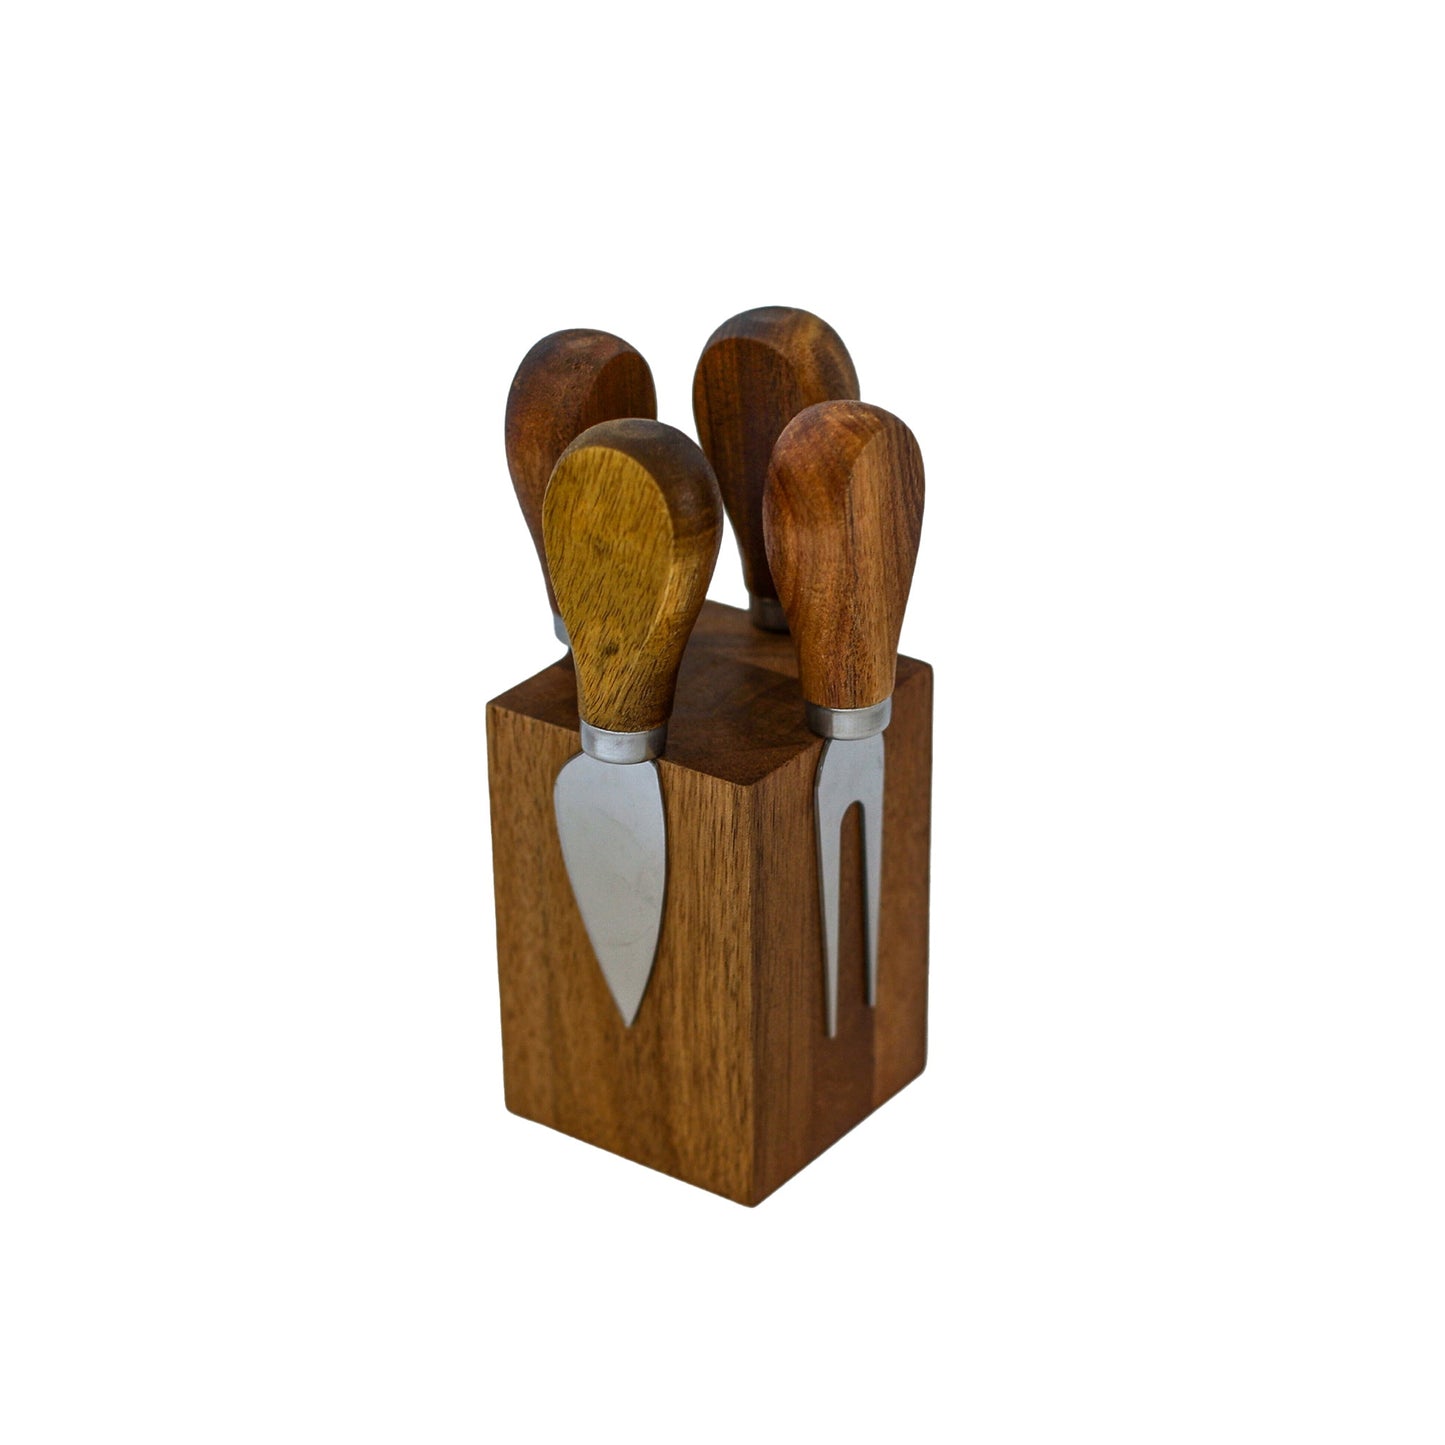 Acacia Wood Block with 4 Cheese Tools by Creative Gifts